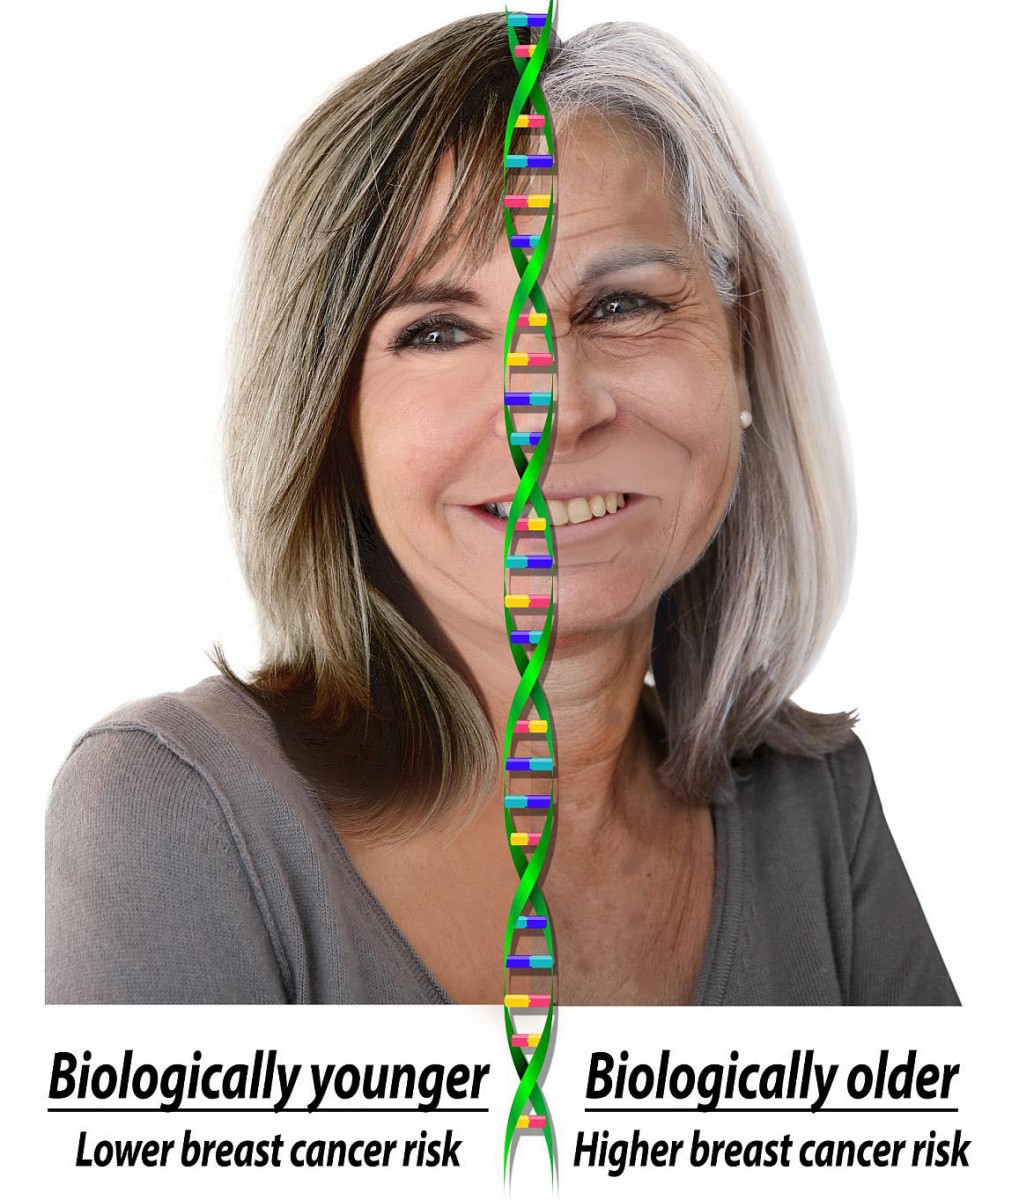 composite picture of a younger and older woman with a DNA strand overlaid on top